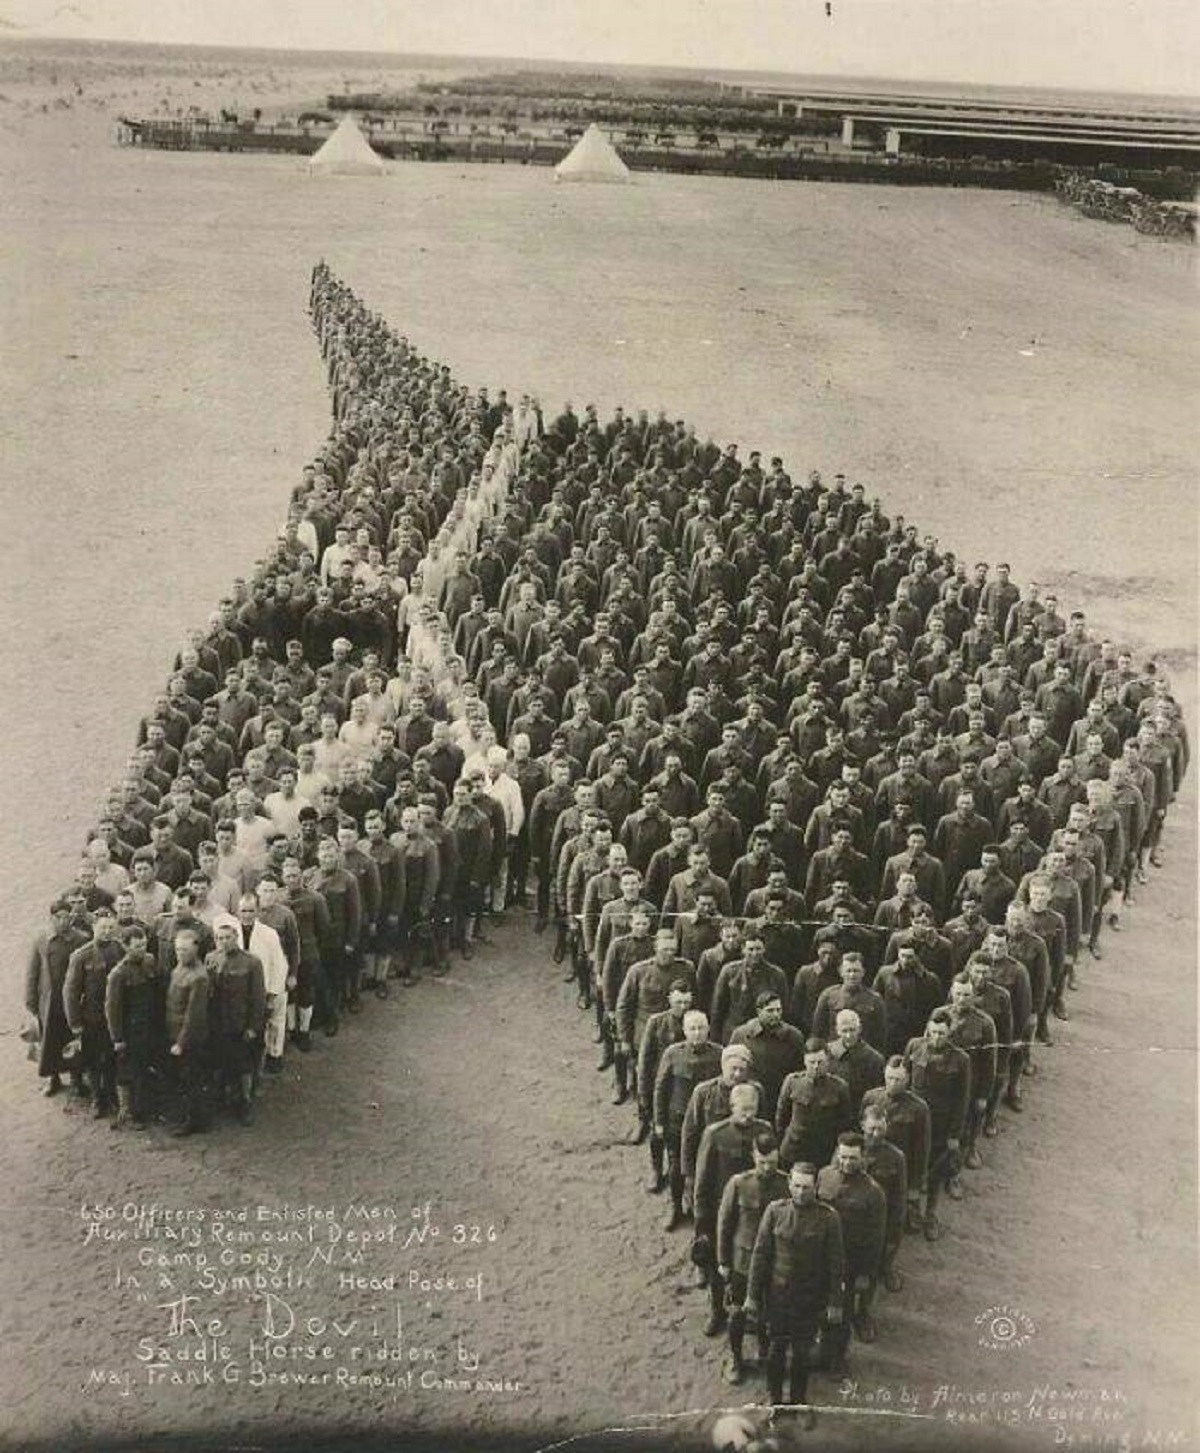 "650 American Officers And Enlisted Men Paying Tribute To More Than 8 Million Horses, Mules And Donkeys That Died In Service In The World War I"